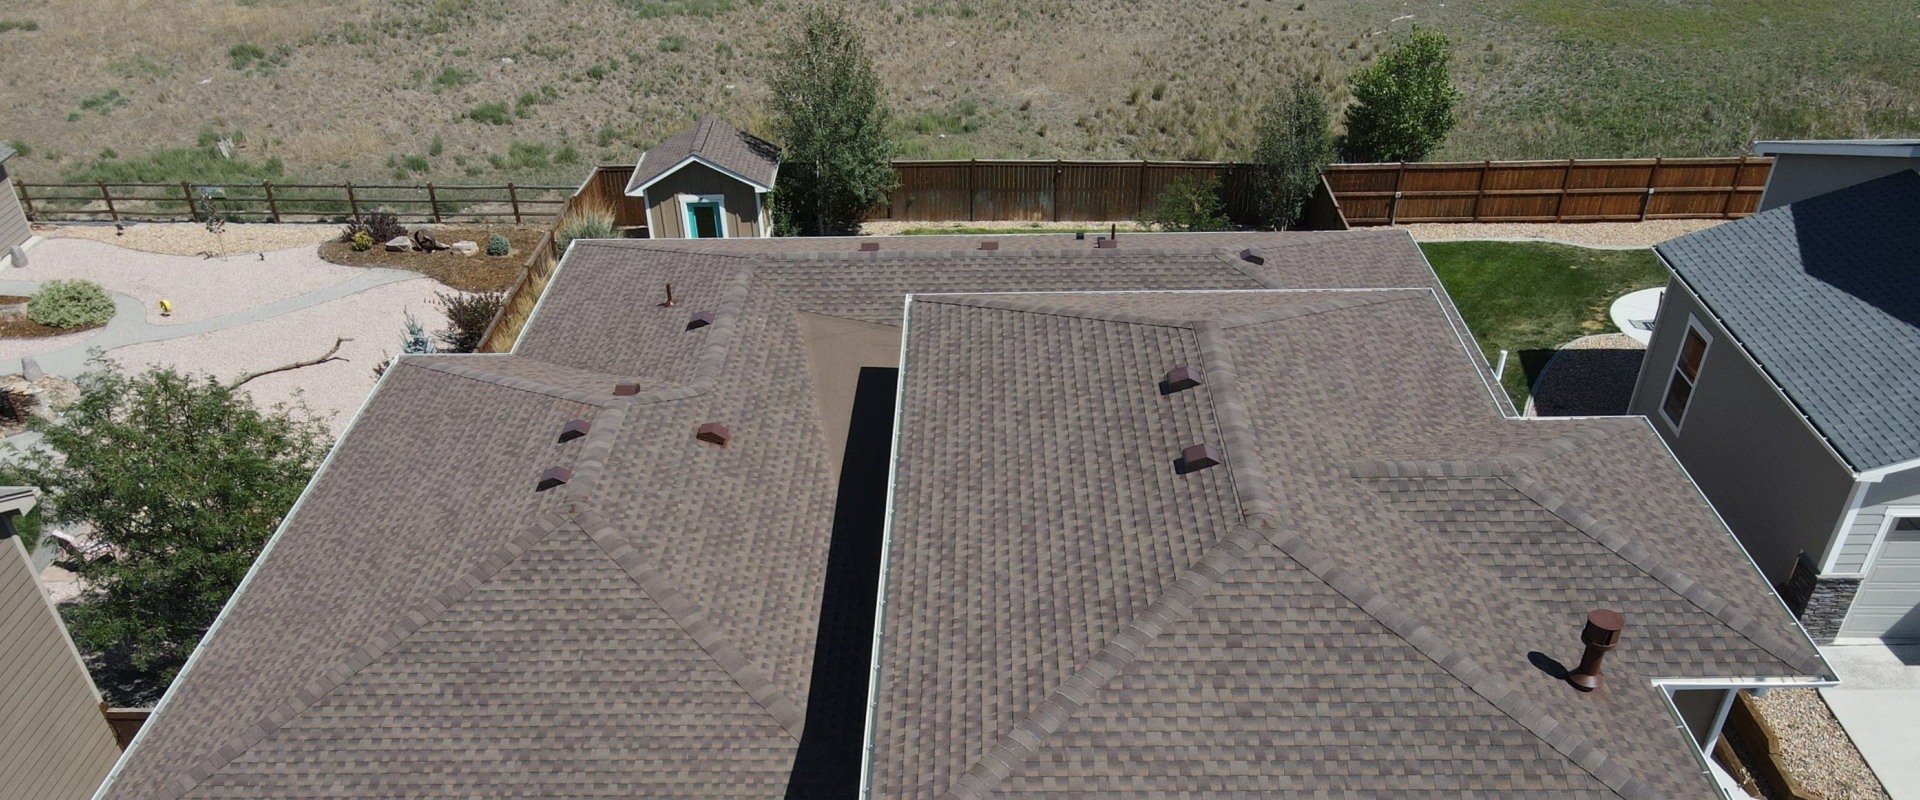 What happens if a roof isn't ventilated properly?